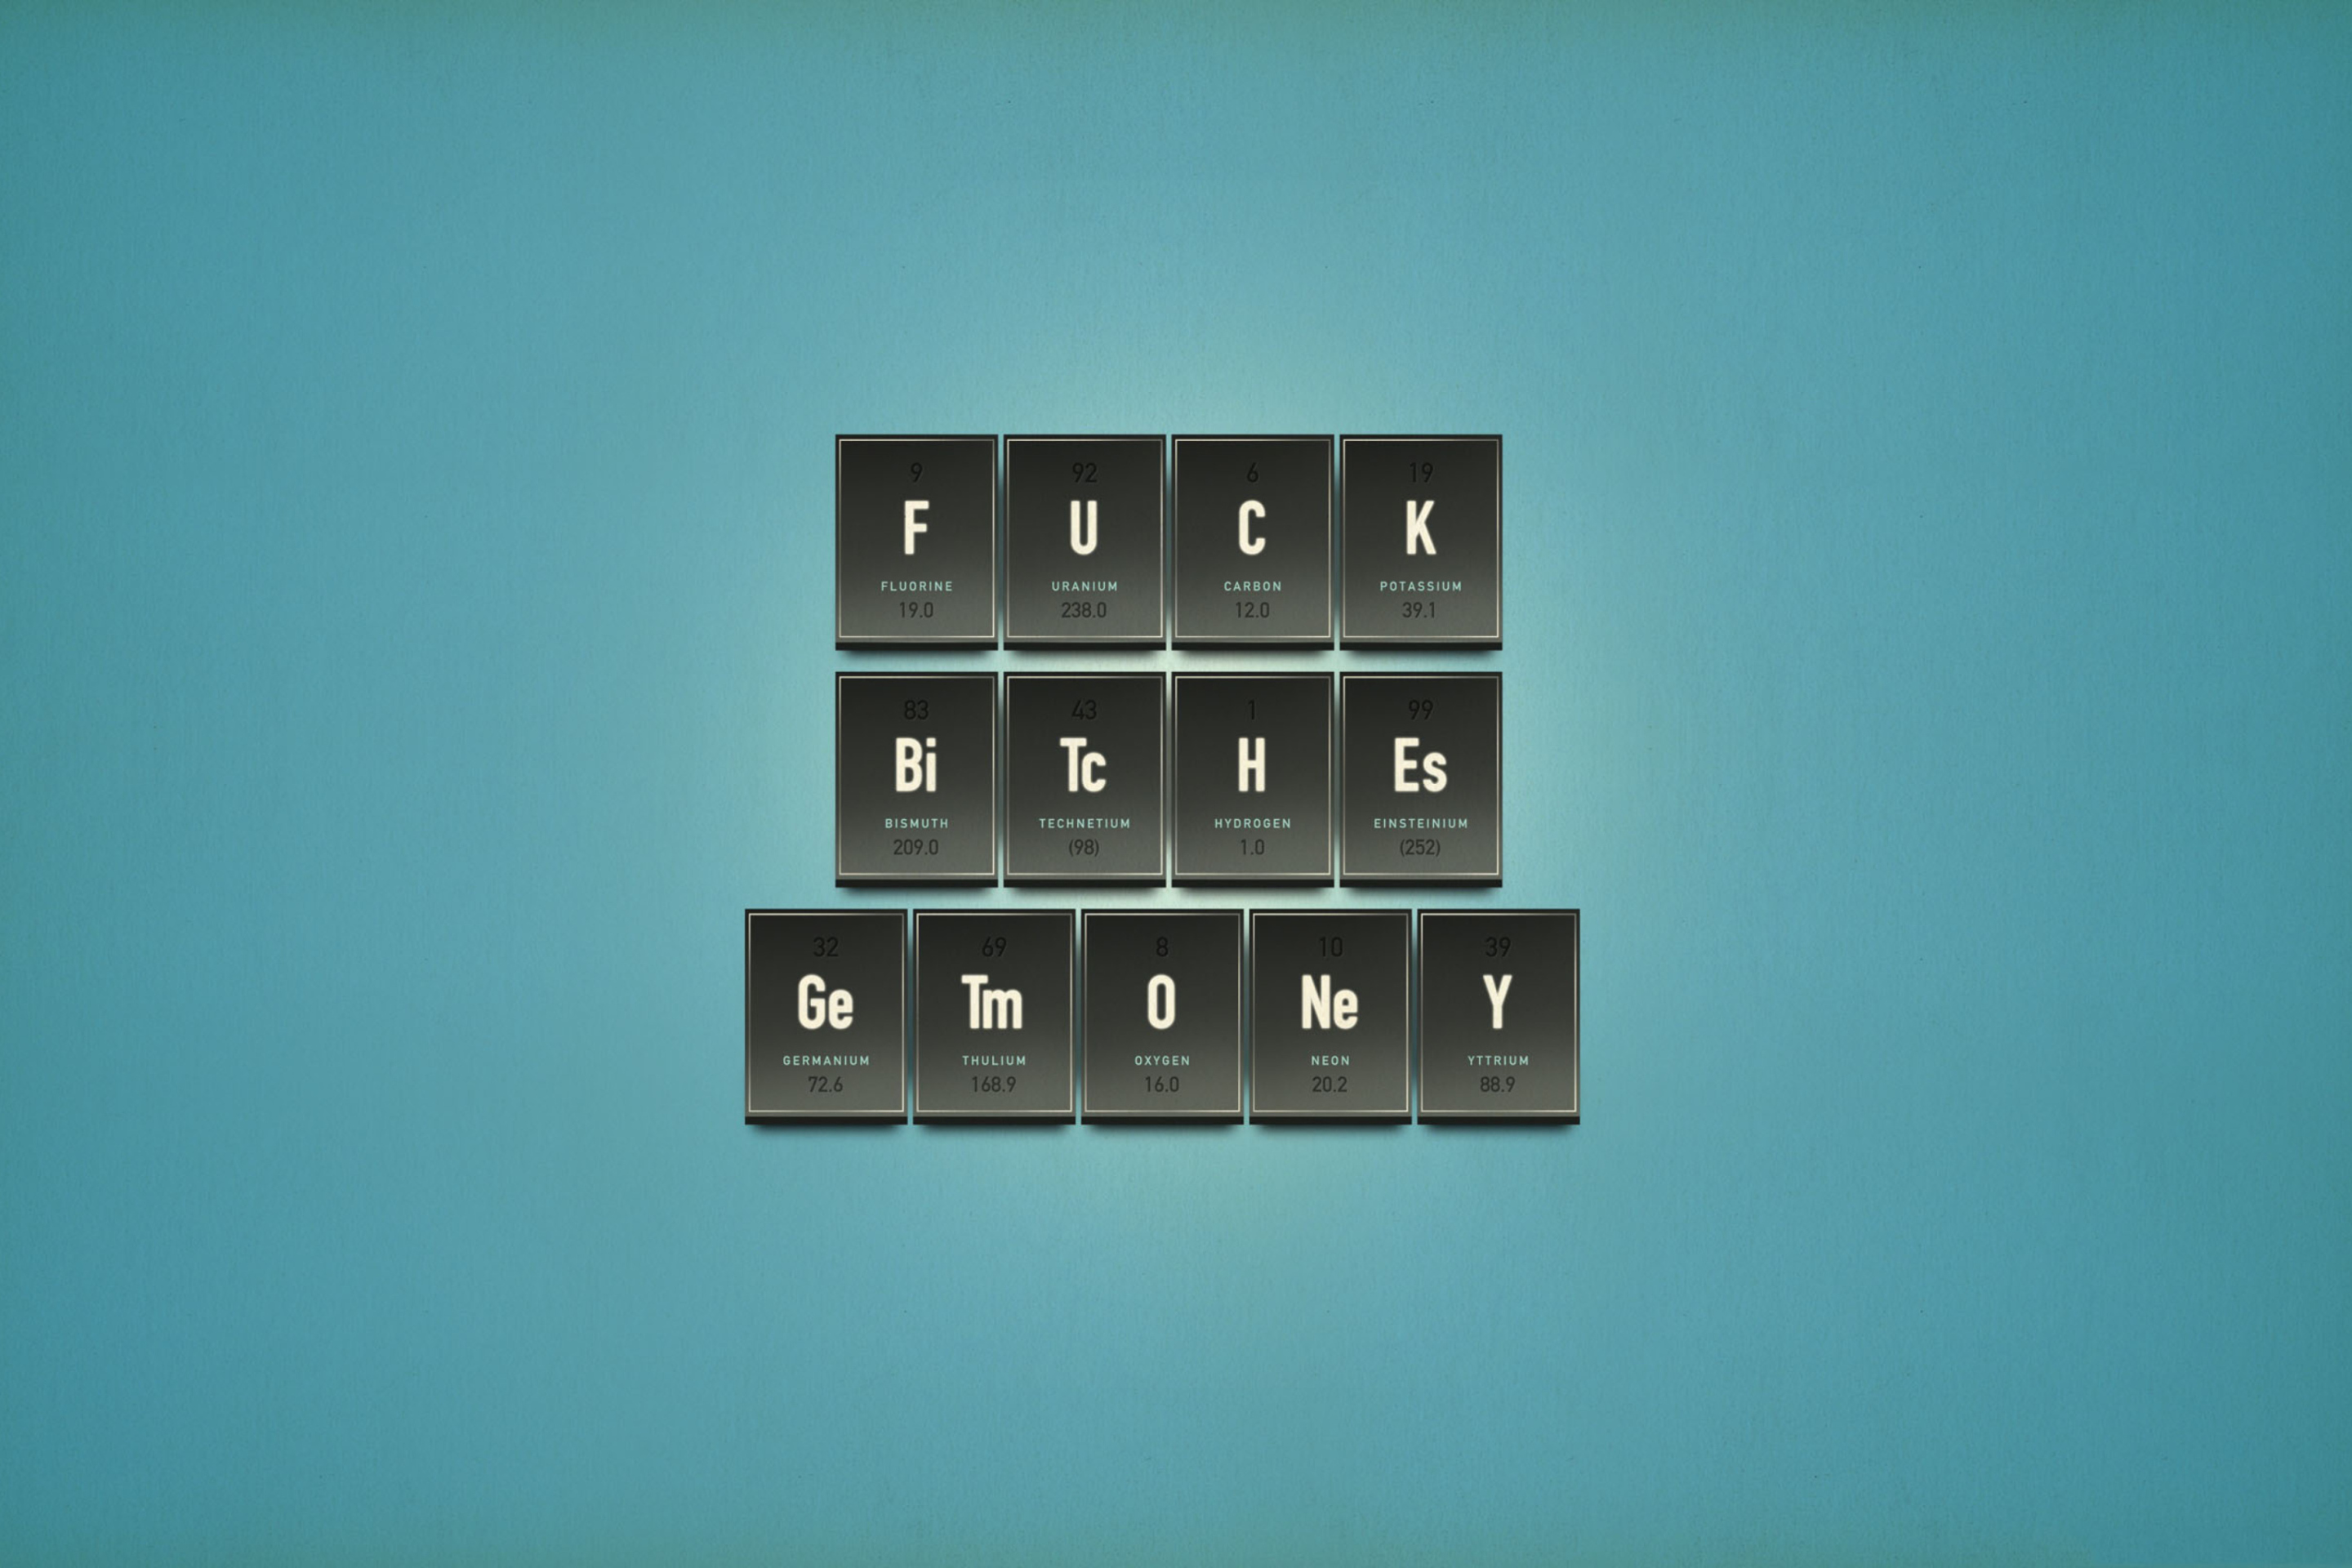 Funny Chemistry Periodic Table screenshot #1 2880x1920